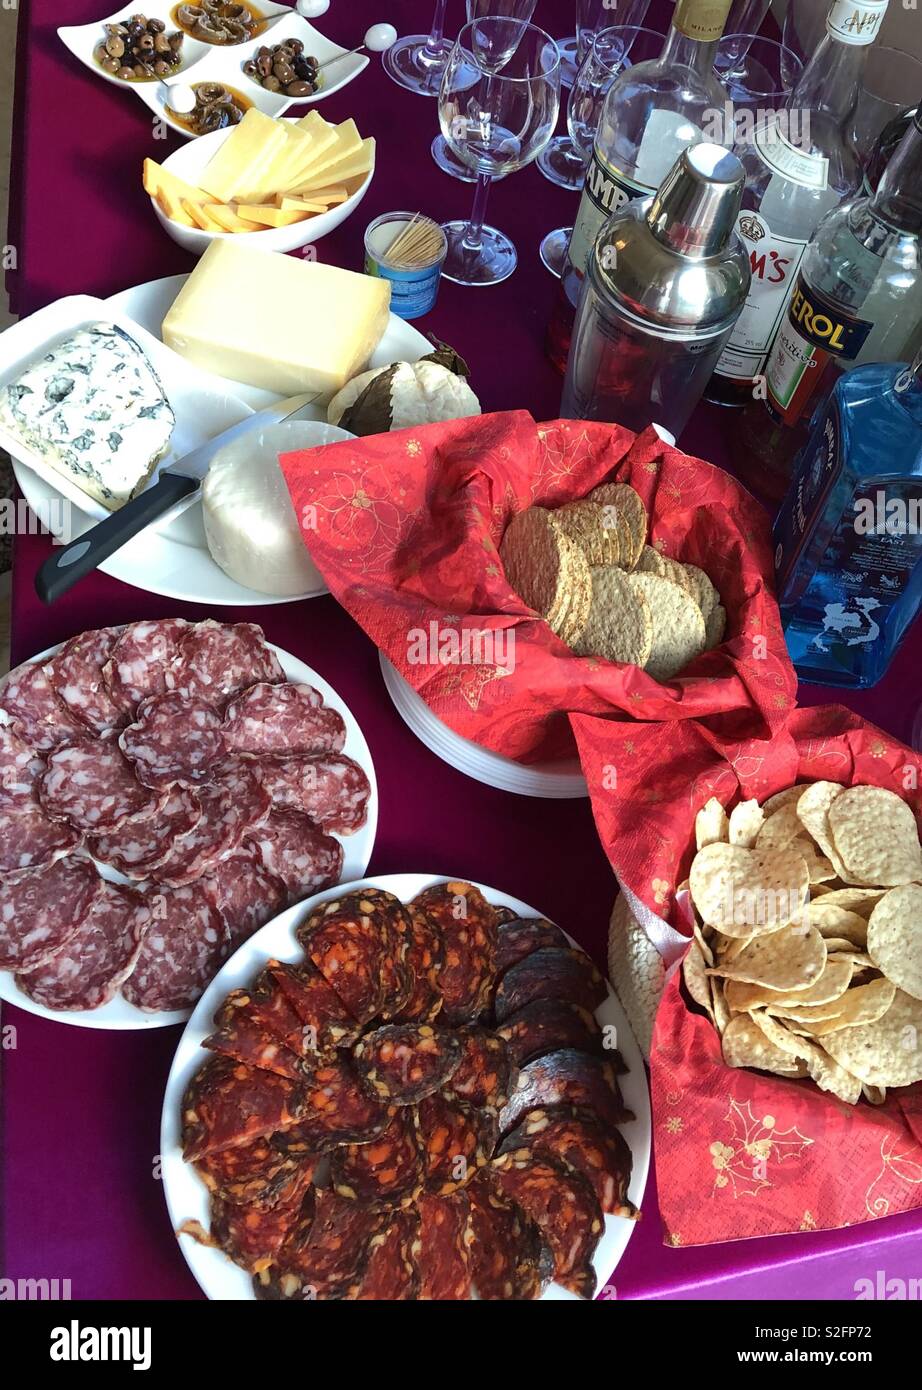 Salami and cheese starter Stock Photo